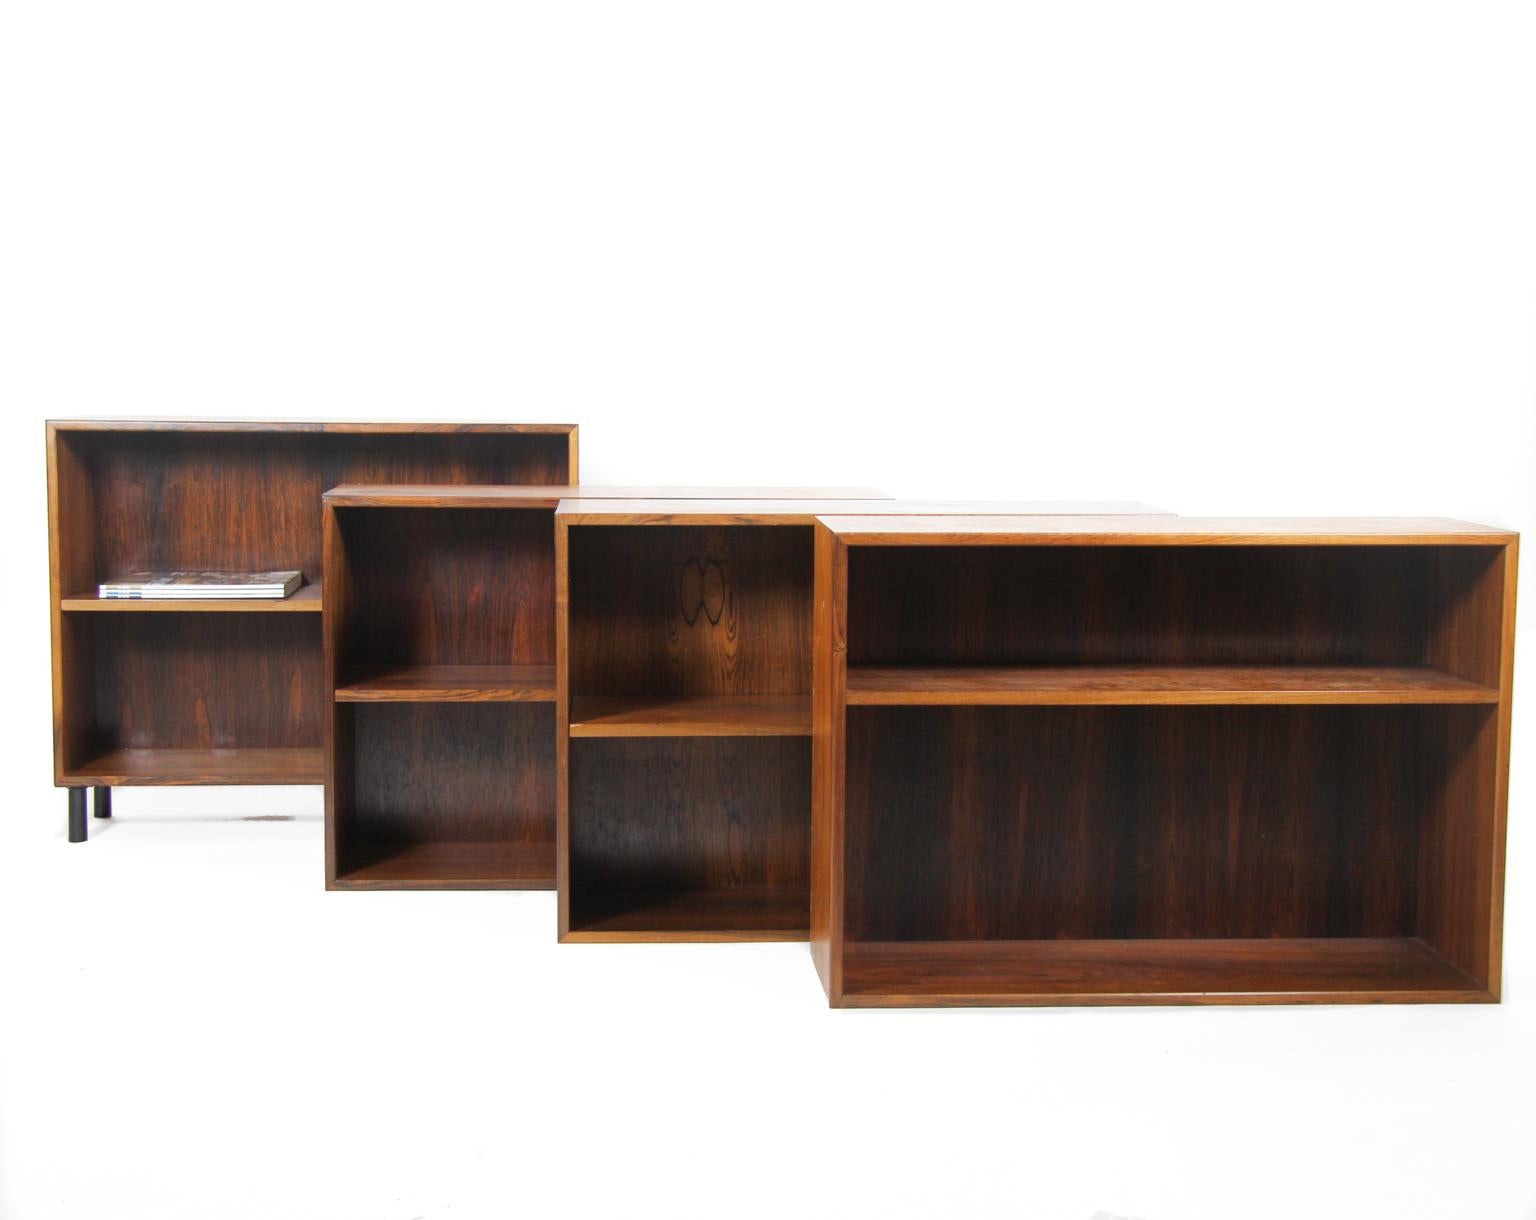 Danish Rosewood Small Bookcases with Metal Black Legs, Made in Denmark, 1960s For Sale